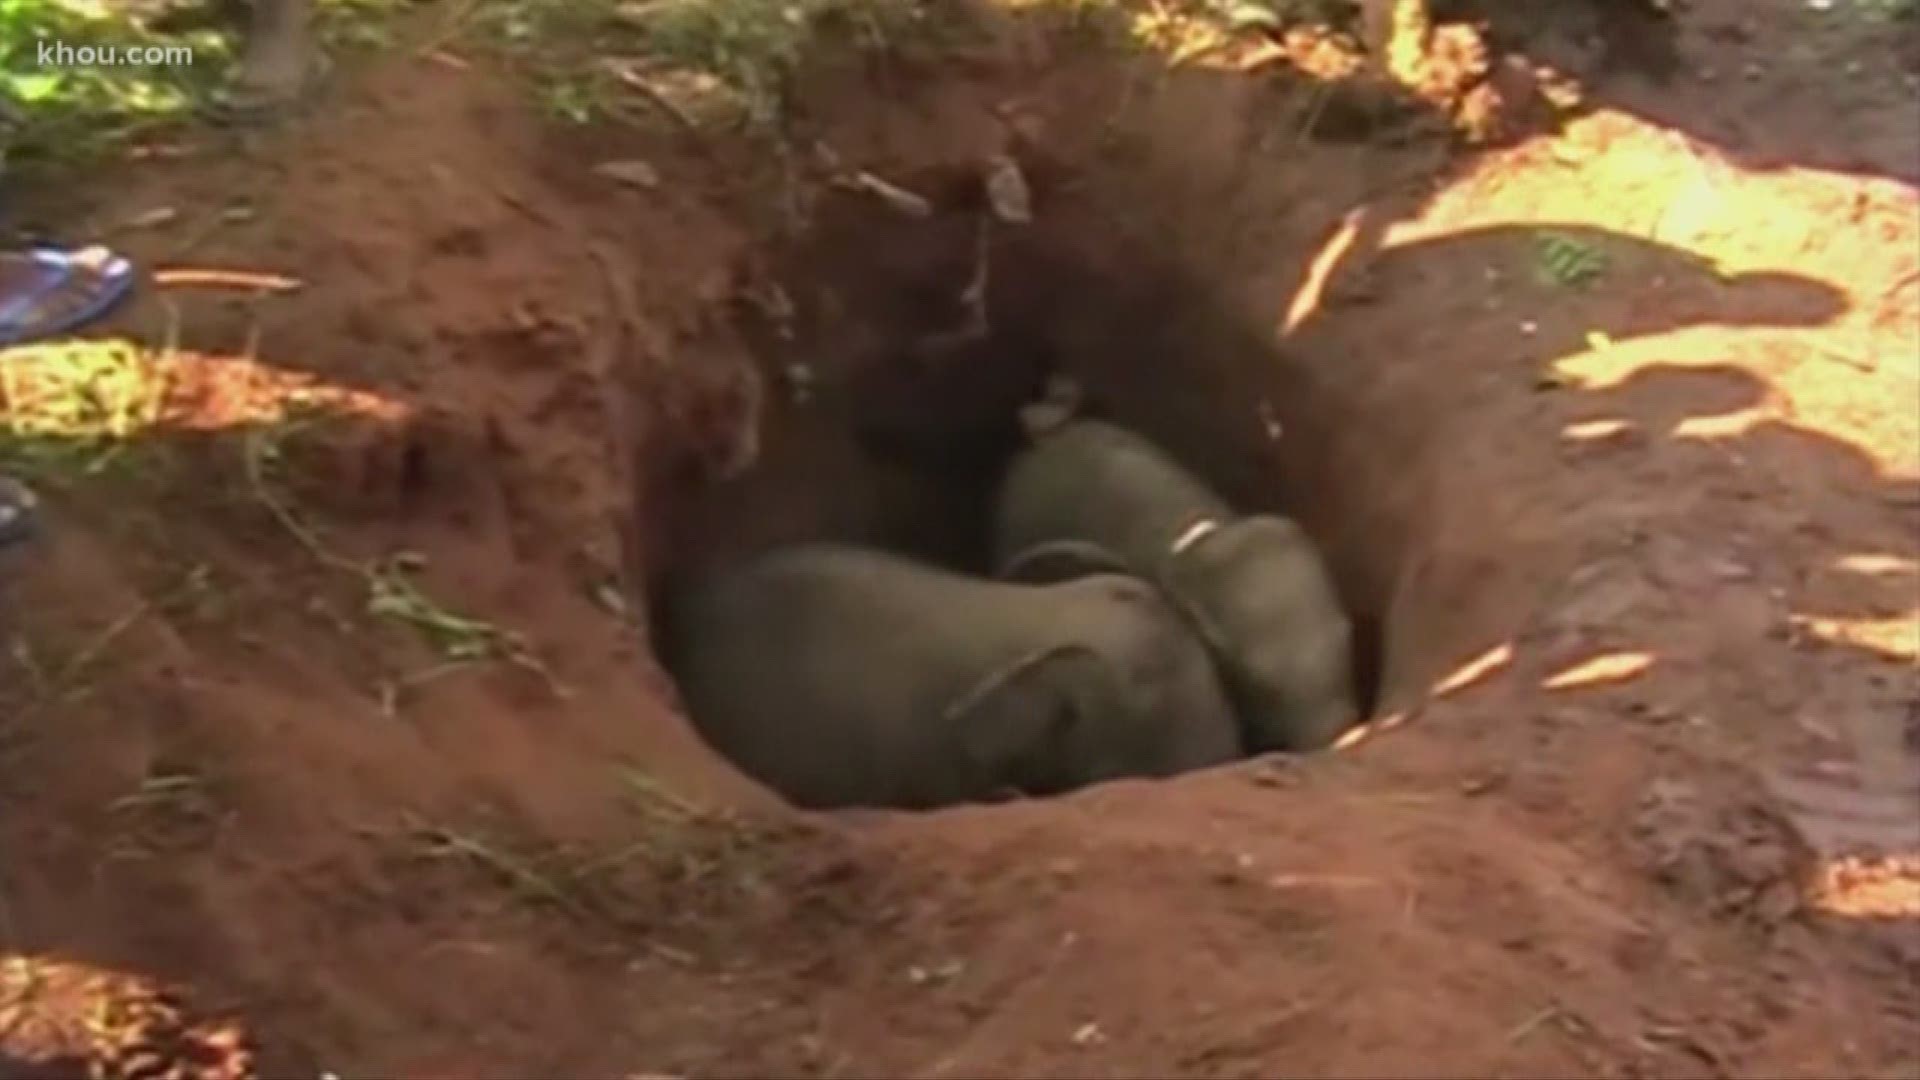 Two baby elephants in Sri Lanka were rescued from a deep muddy hole by wildlife officials. The calves were eventually reunited with their mothers in the jungle.